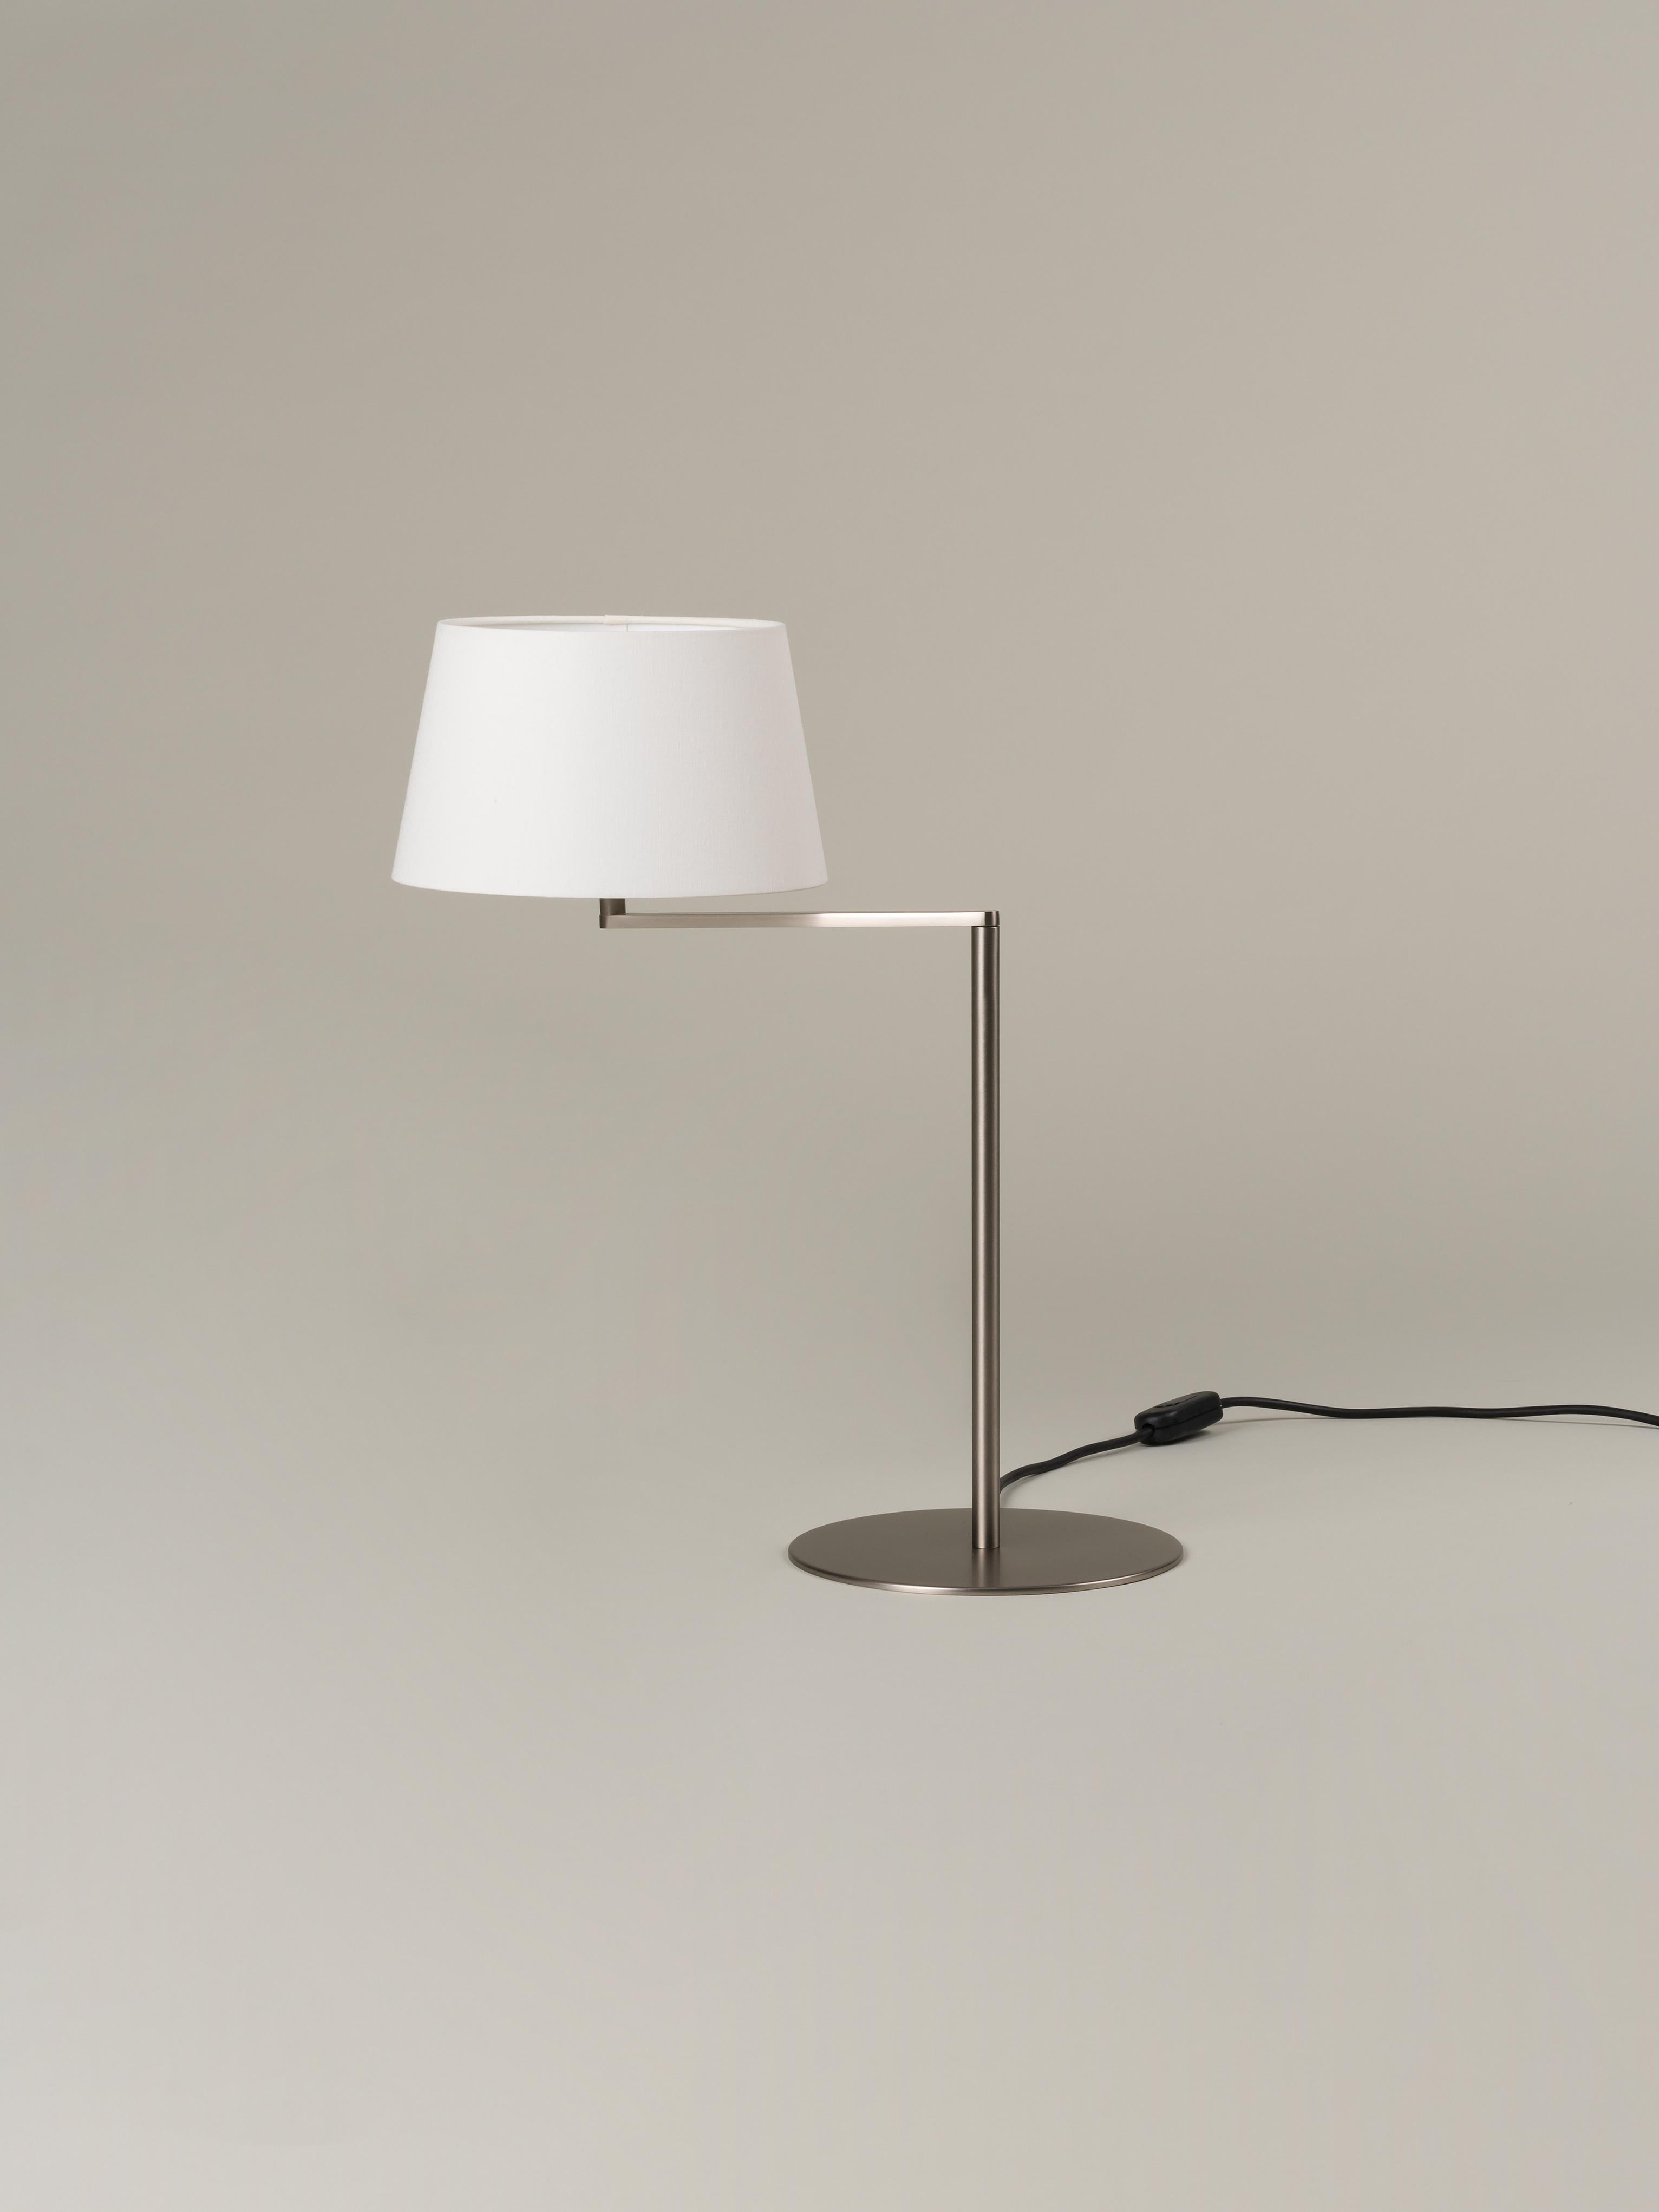 Americana table lamp by Miguel Milá
Dimensions: W 25 x D 46 x H 54 cm
Materials: Satin nickel, linen.

The Americana series is built around a satin nickel rotating arm holding an elegant white linen shade. The arm gently swivels the light nearer